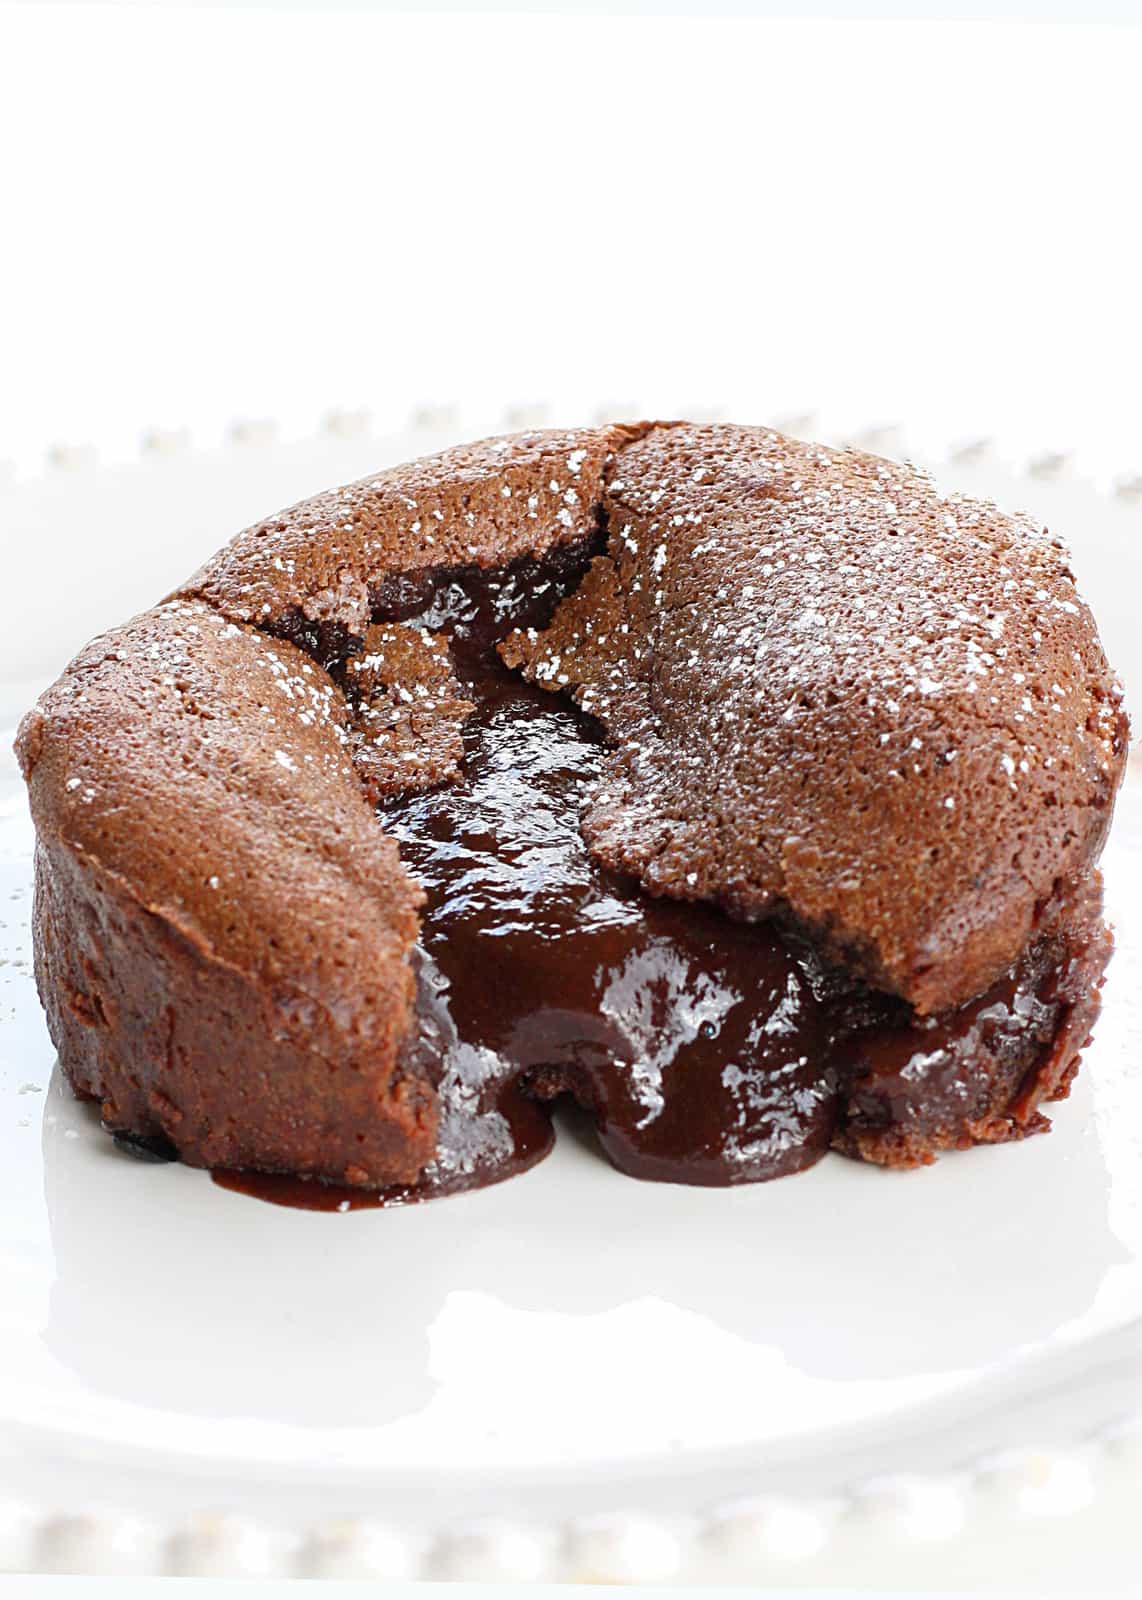 Roy's Chocolate Souffle (Molten Lava Cakes) - a gooey chocolate center is a surprise in the middle! A chocolate lover's dream. Not a copycat recipe. The actual recipe from Roy's. the-girl-who-ate-everything.com